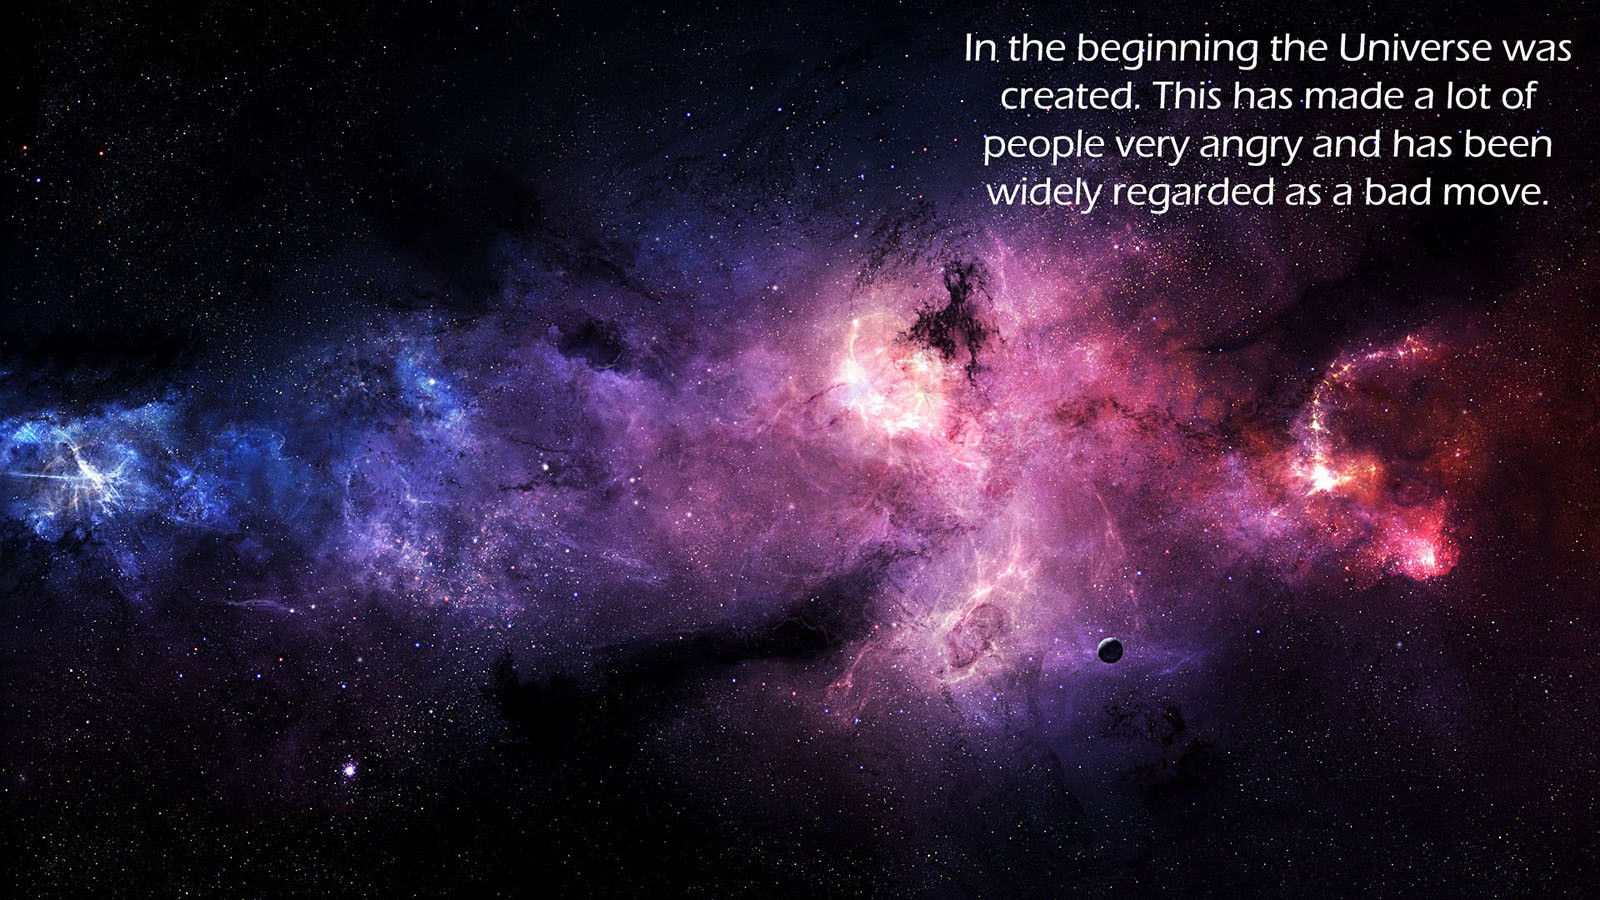 General 1600x900 space universe The Hitchhiker's Guide to the Galaxy space art humor Douglas Adams quote text